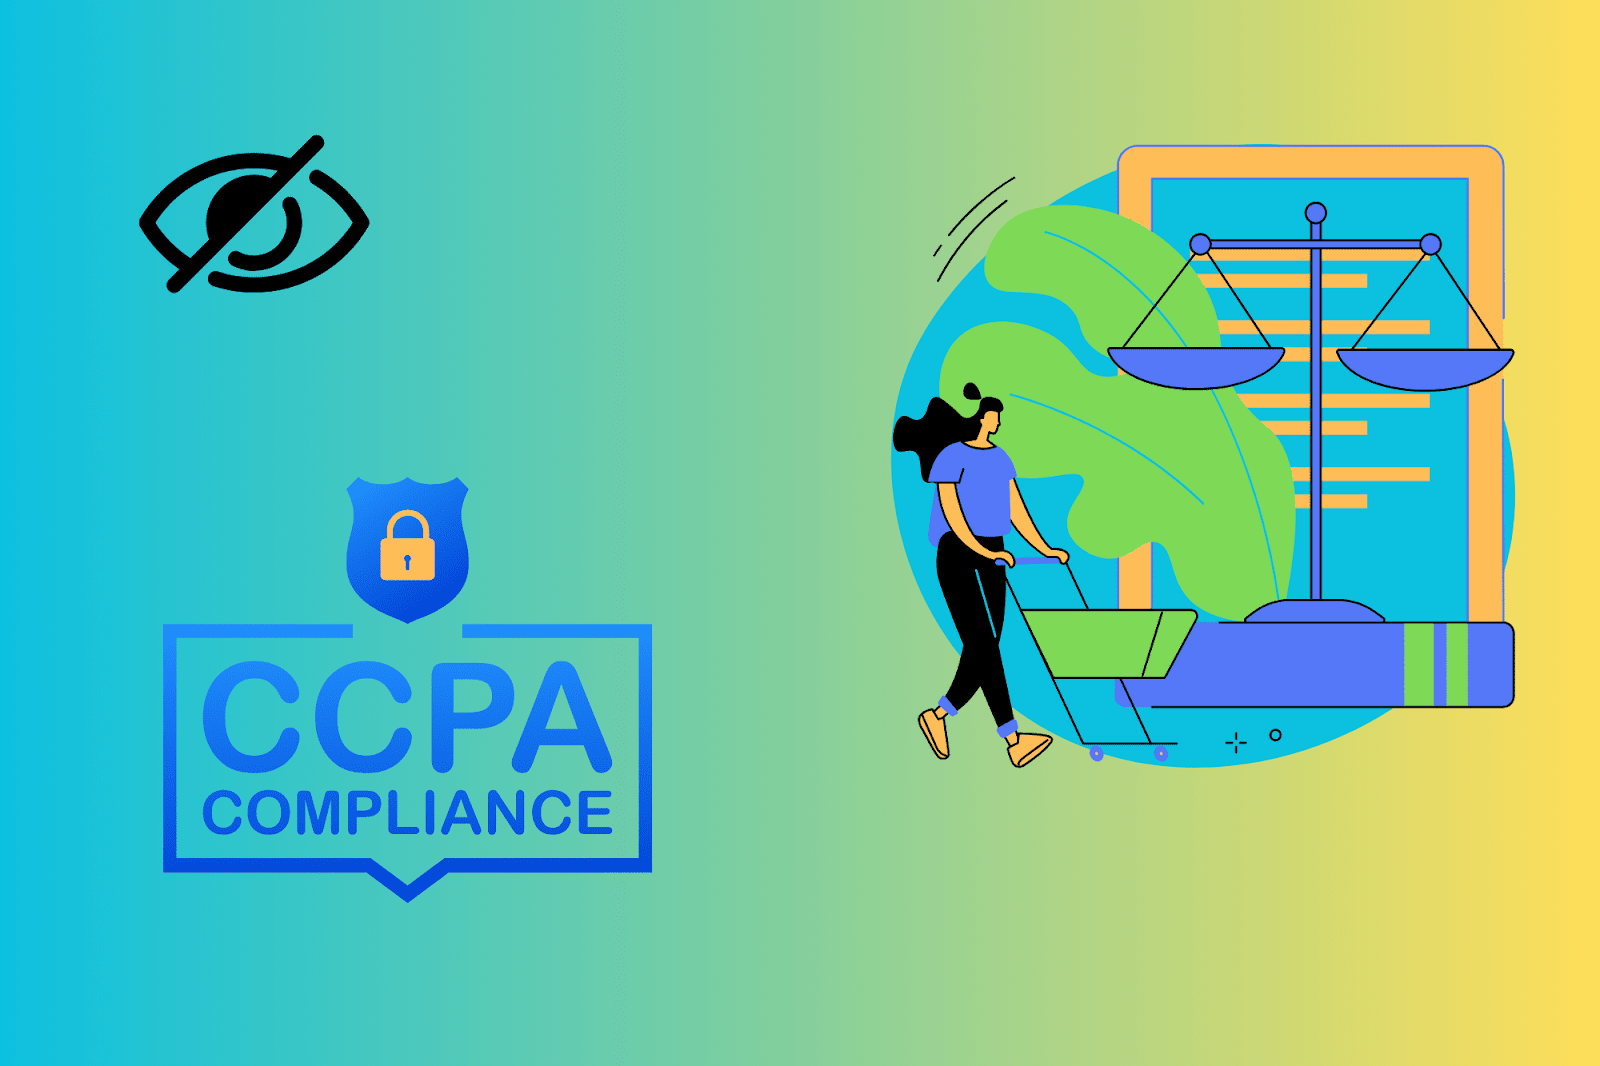 California Consumer Privacy Act (CCPA) and California Privacy Rights Act (CPRA)